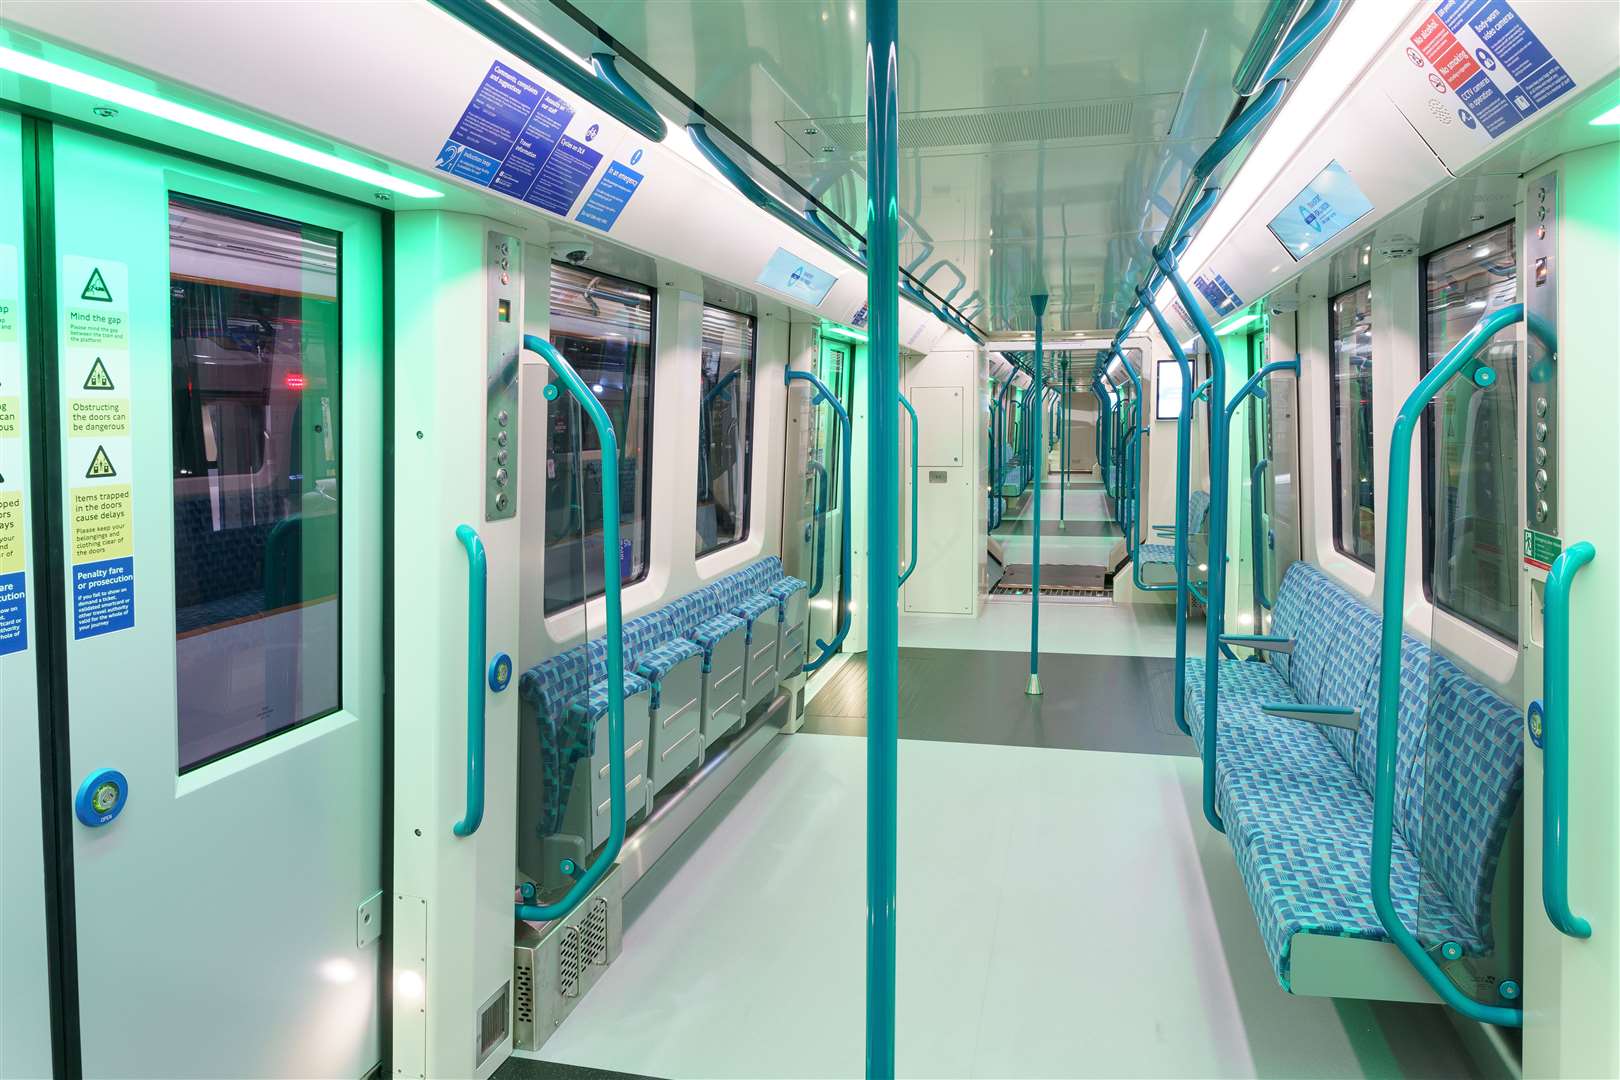 There are 54 new trains under construction